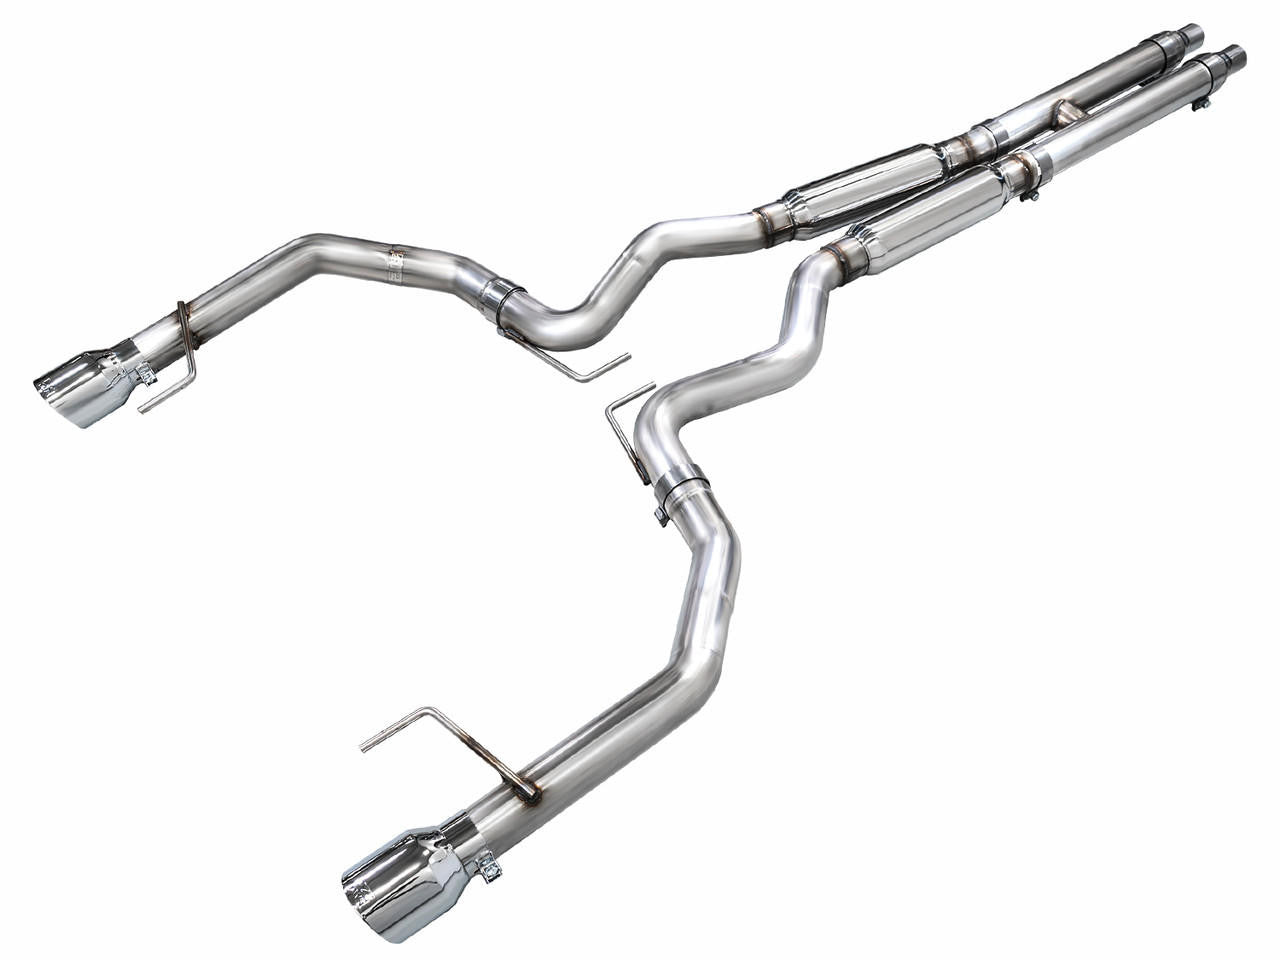 AWE Tuning AWE Track Edition Exhaust for S650 Mustang GT Fastback - Dual Chrome Silver Tips 3020-32650 